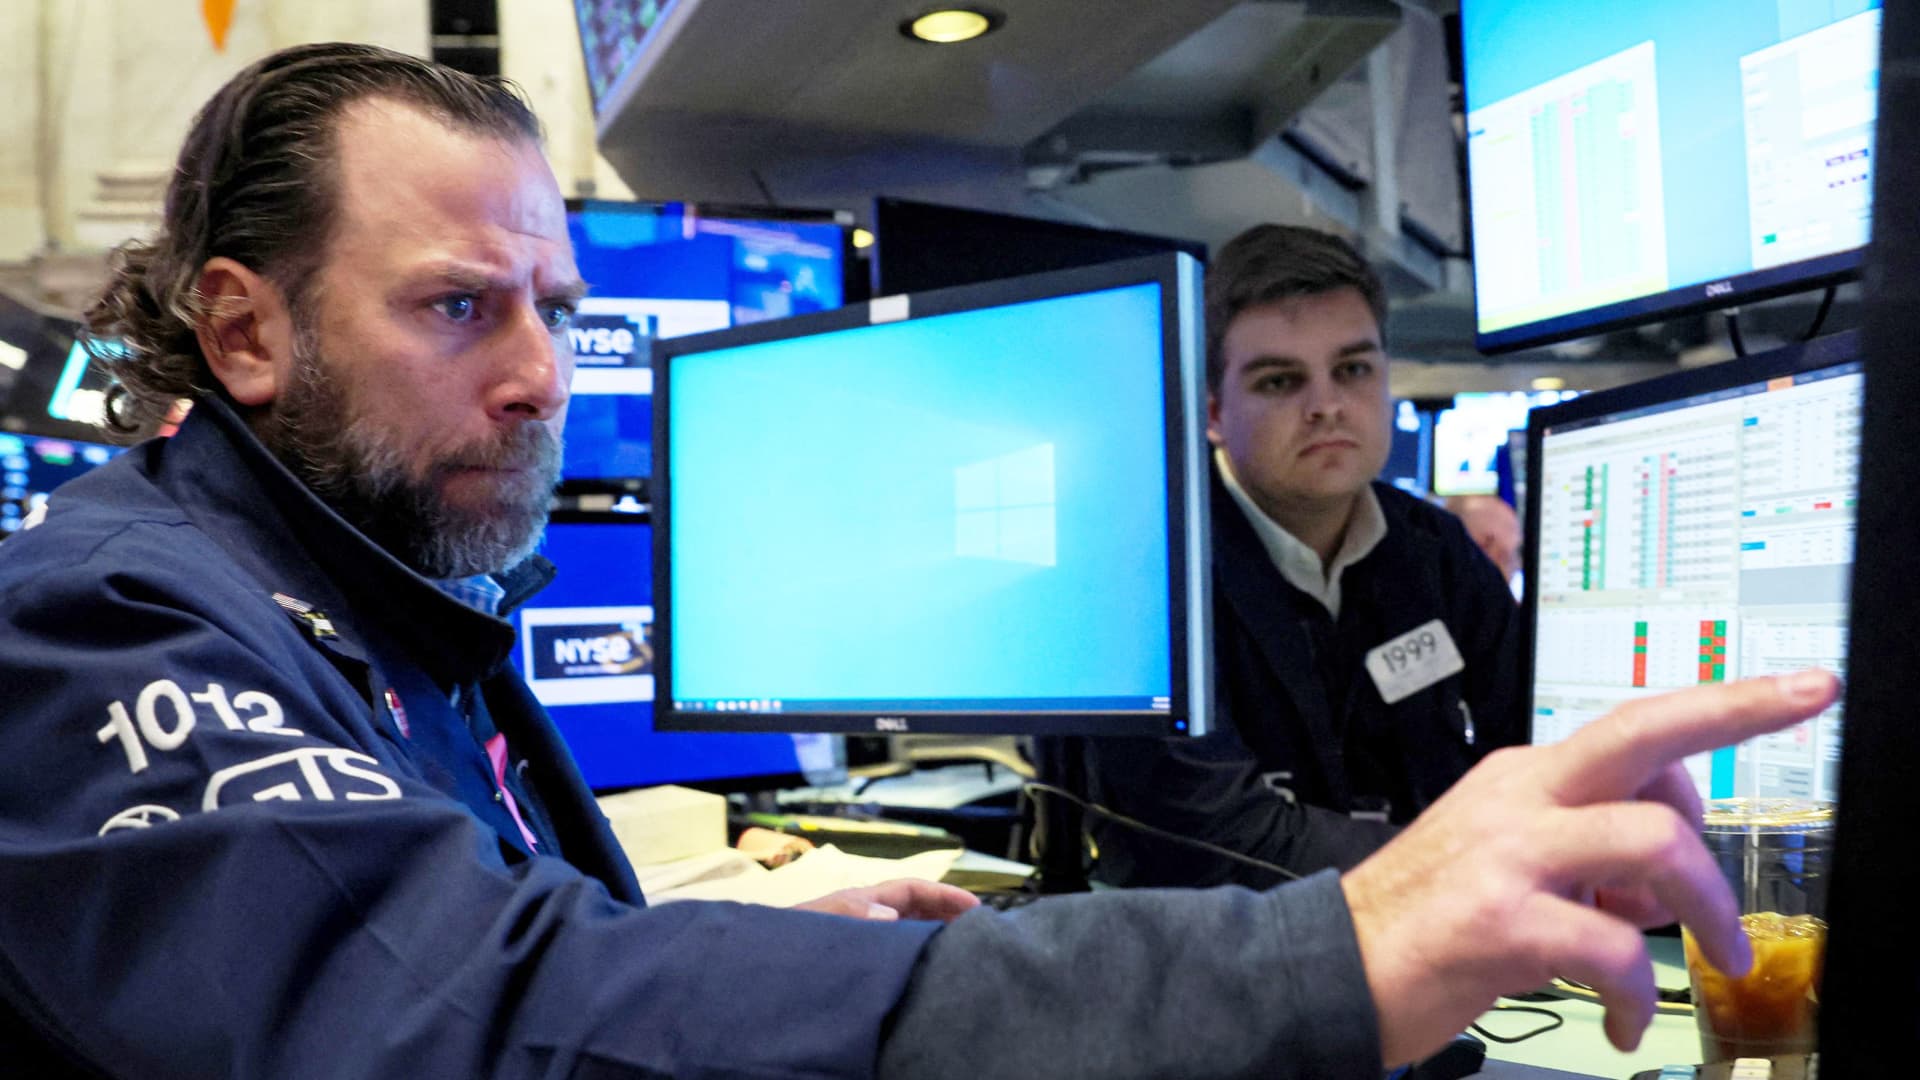 The stock market is trapped in a clear downtrend, and the situation could get worse